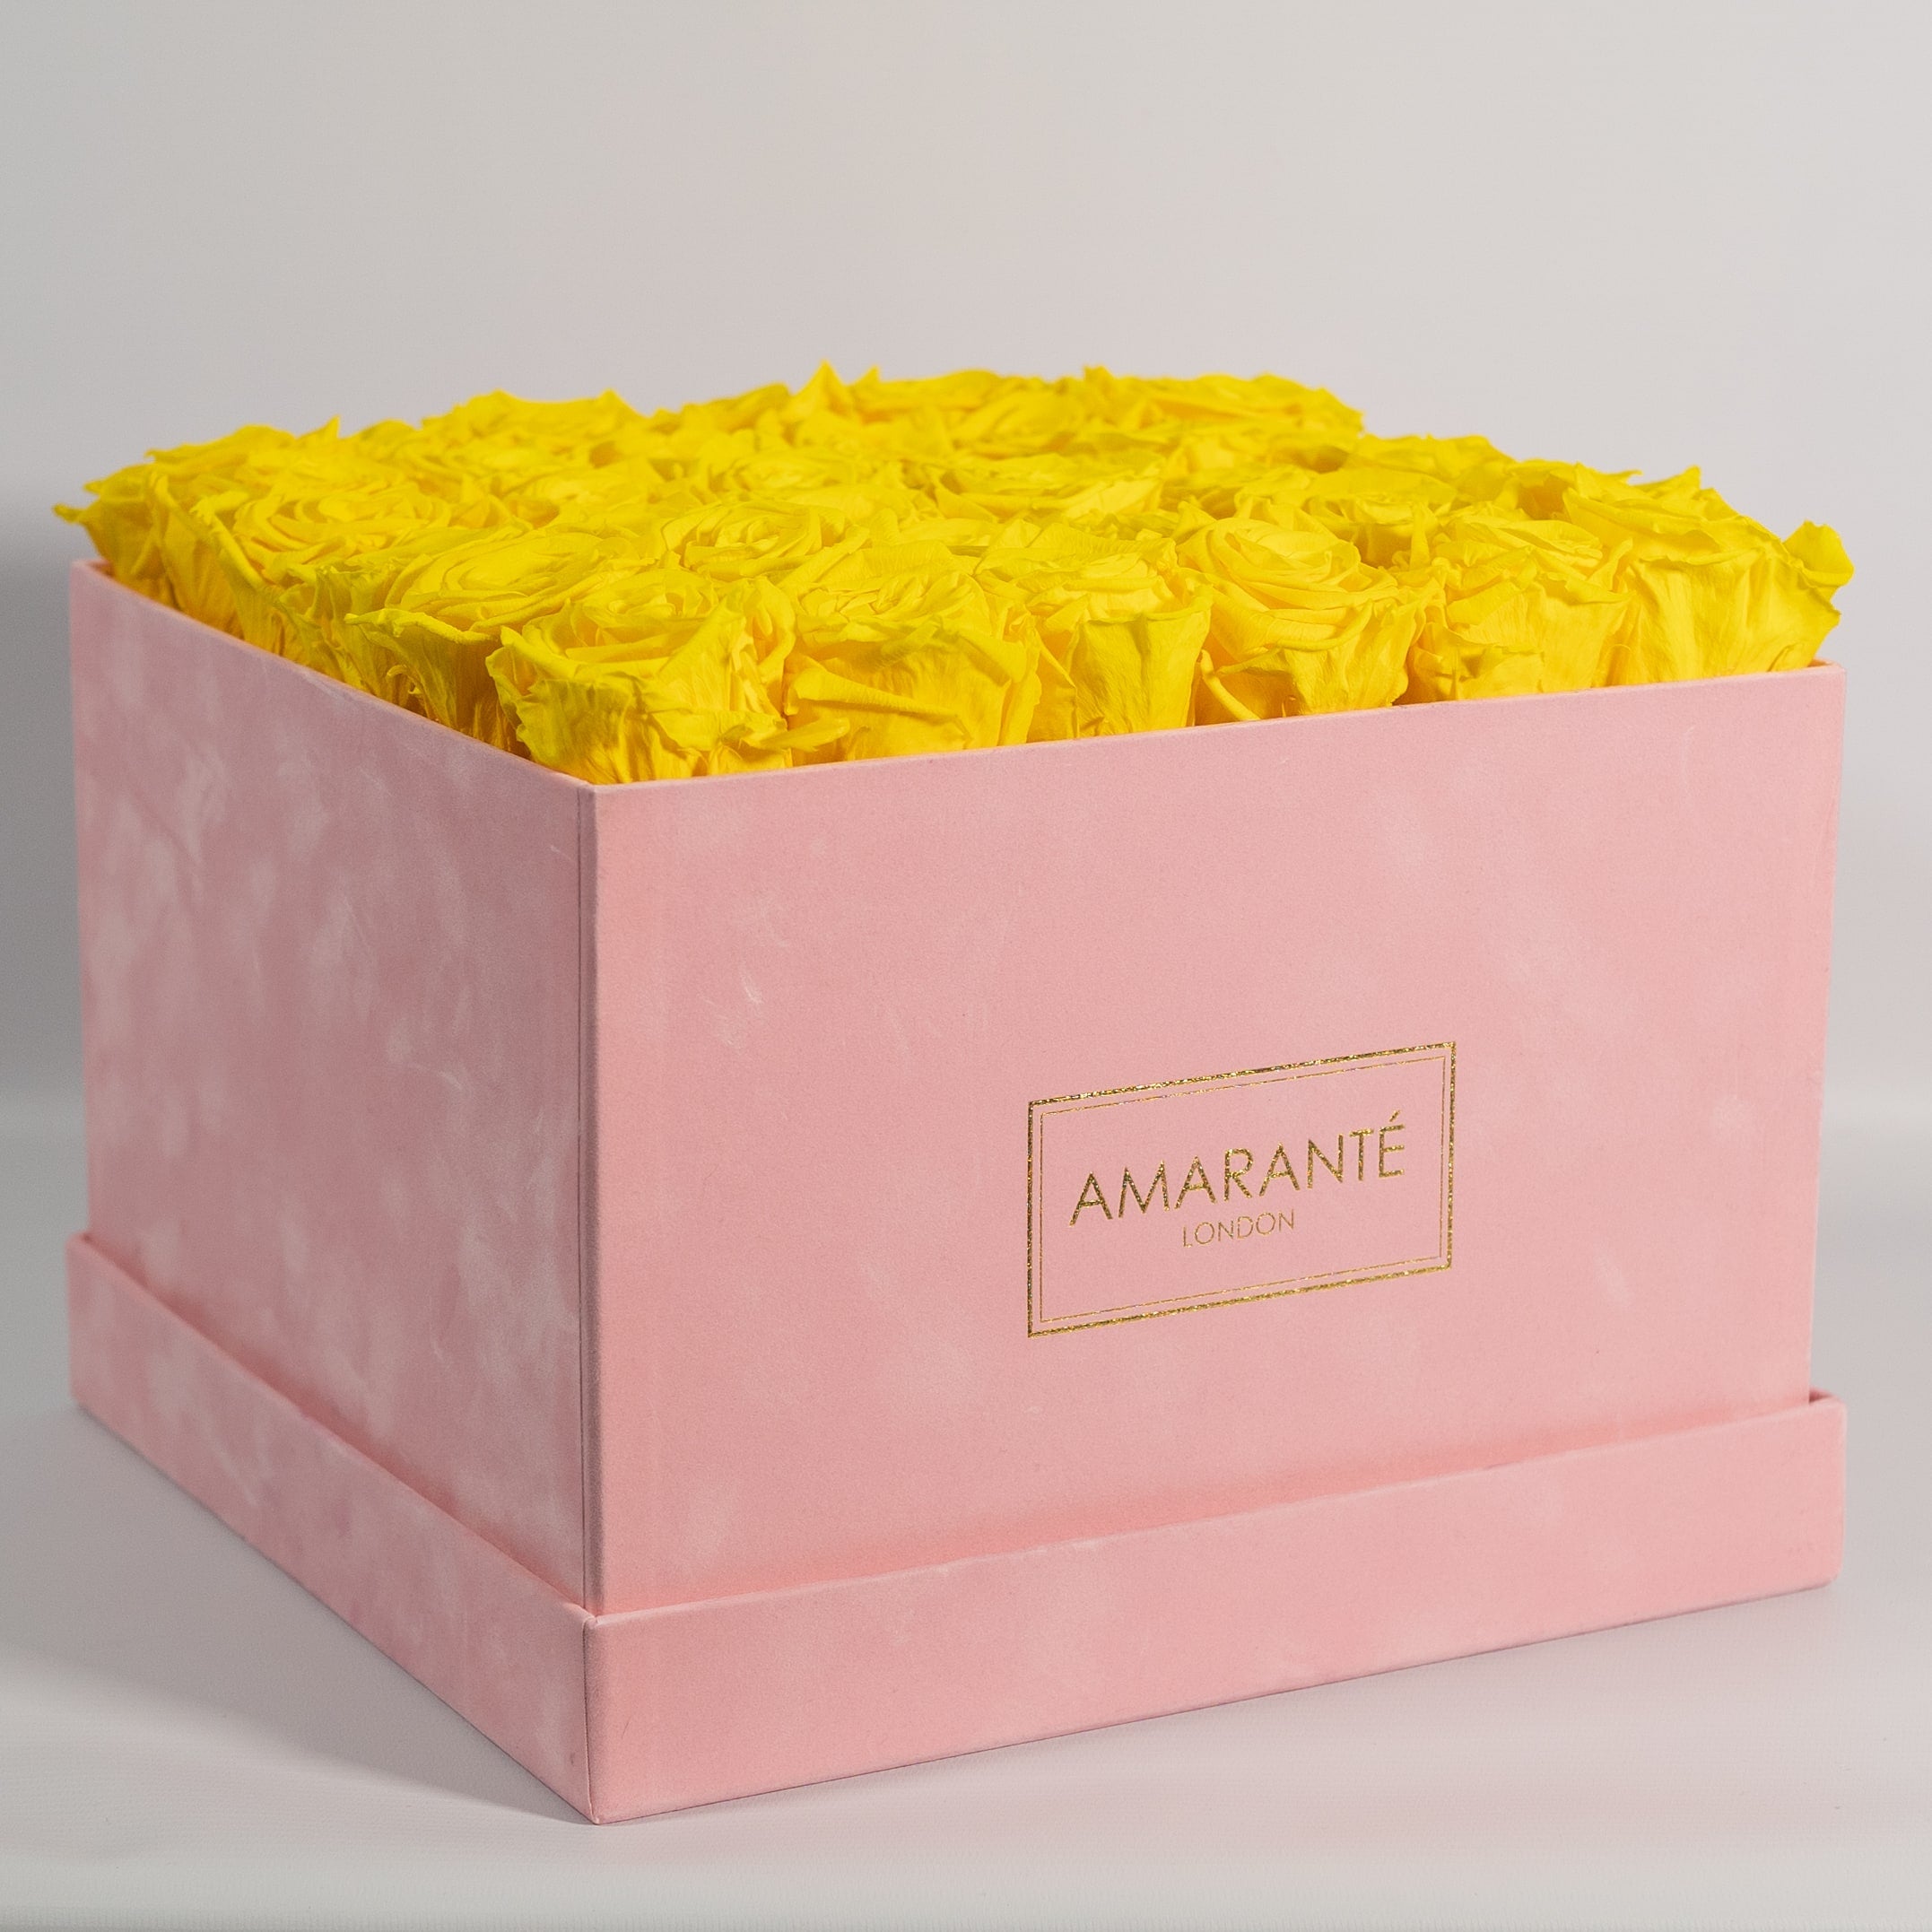 Delightful yellow roses encompassed in a gorgeous pink box 